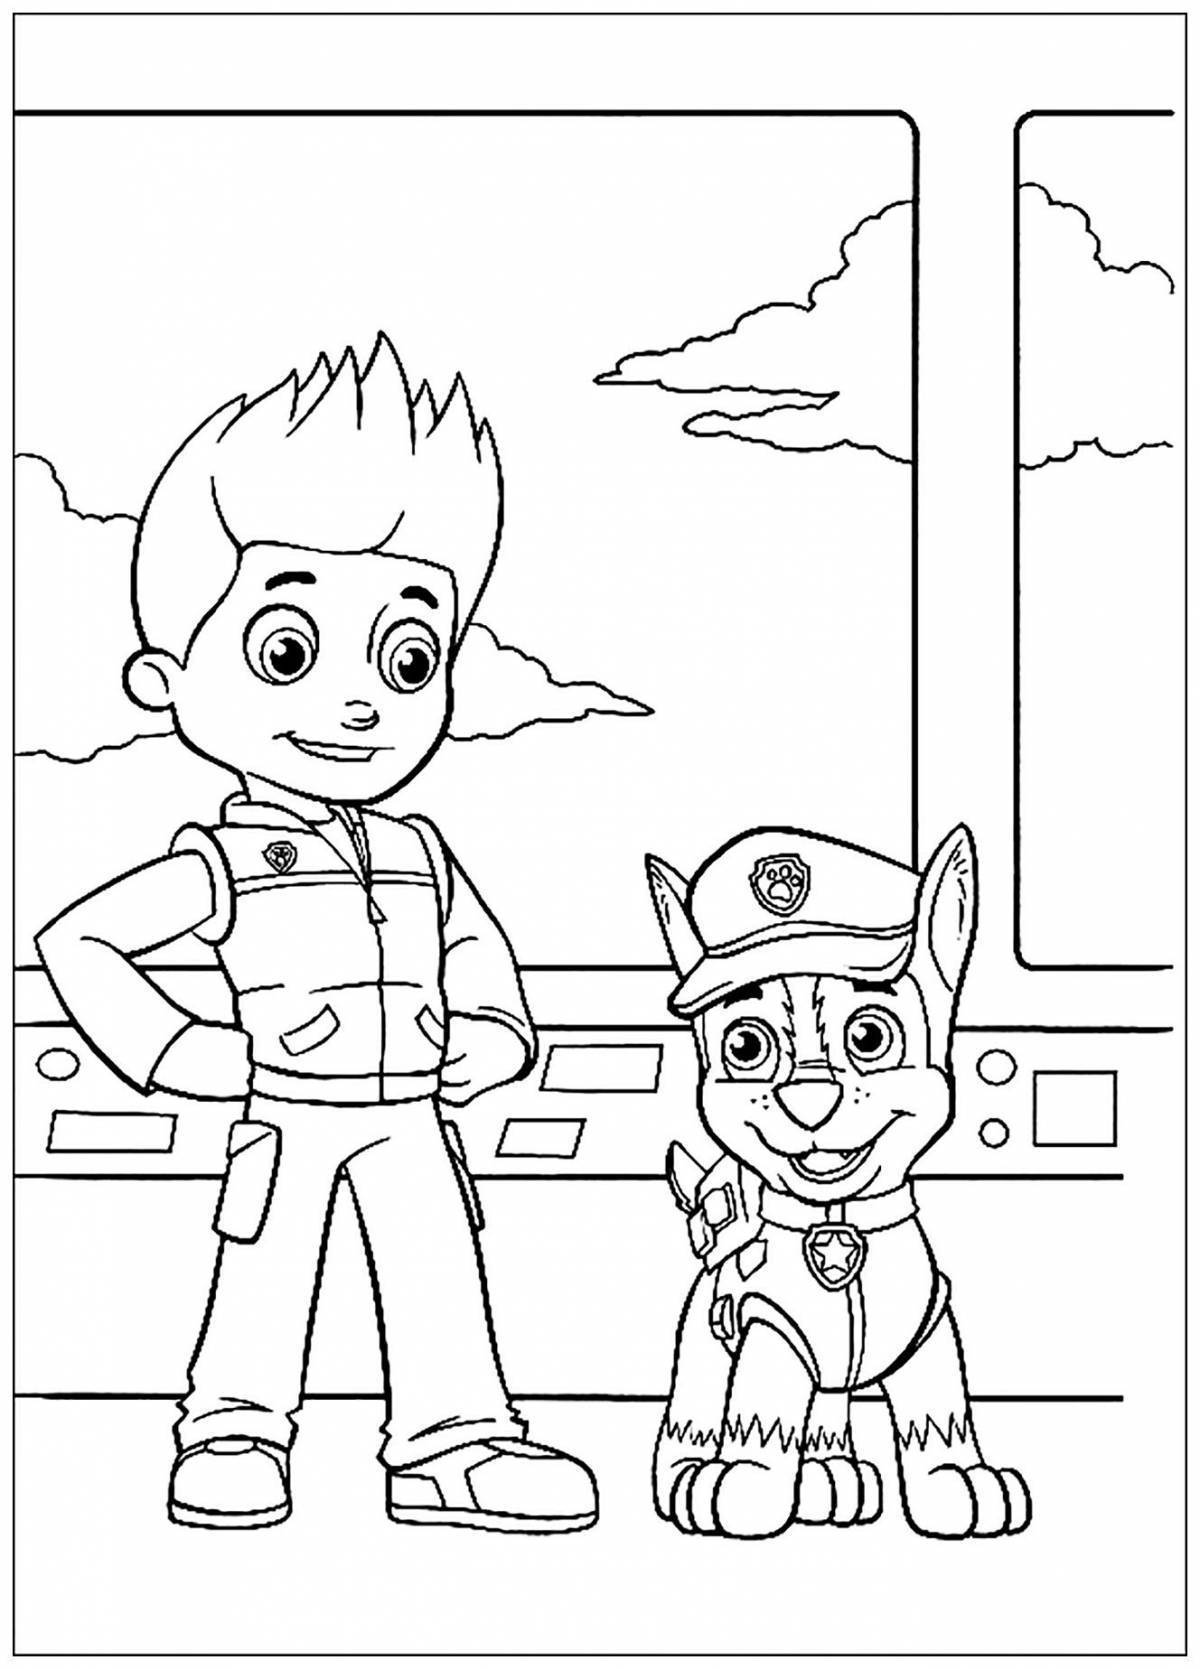 Dynamic rider coloring page